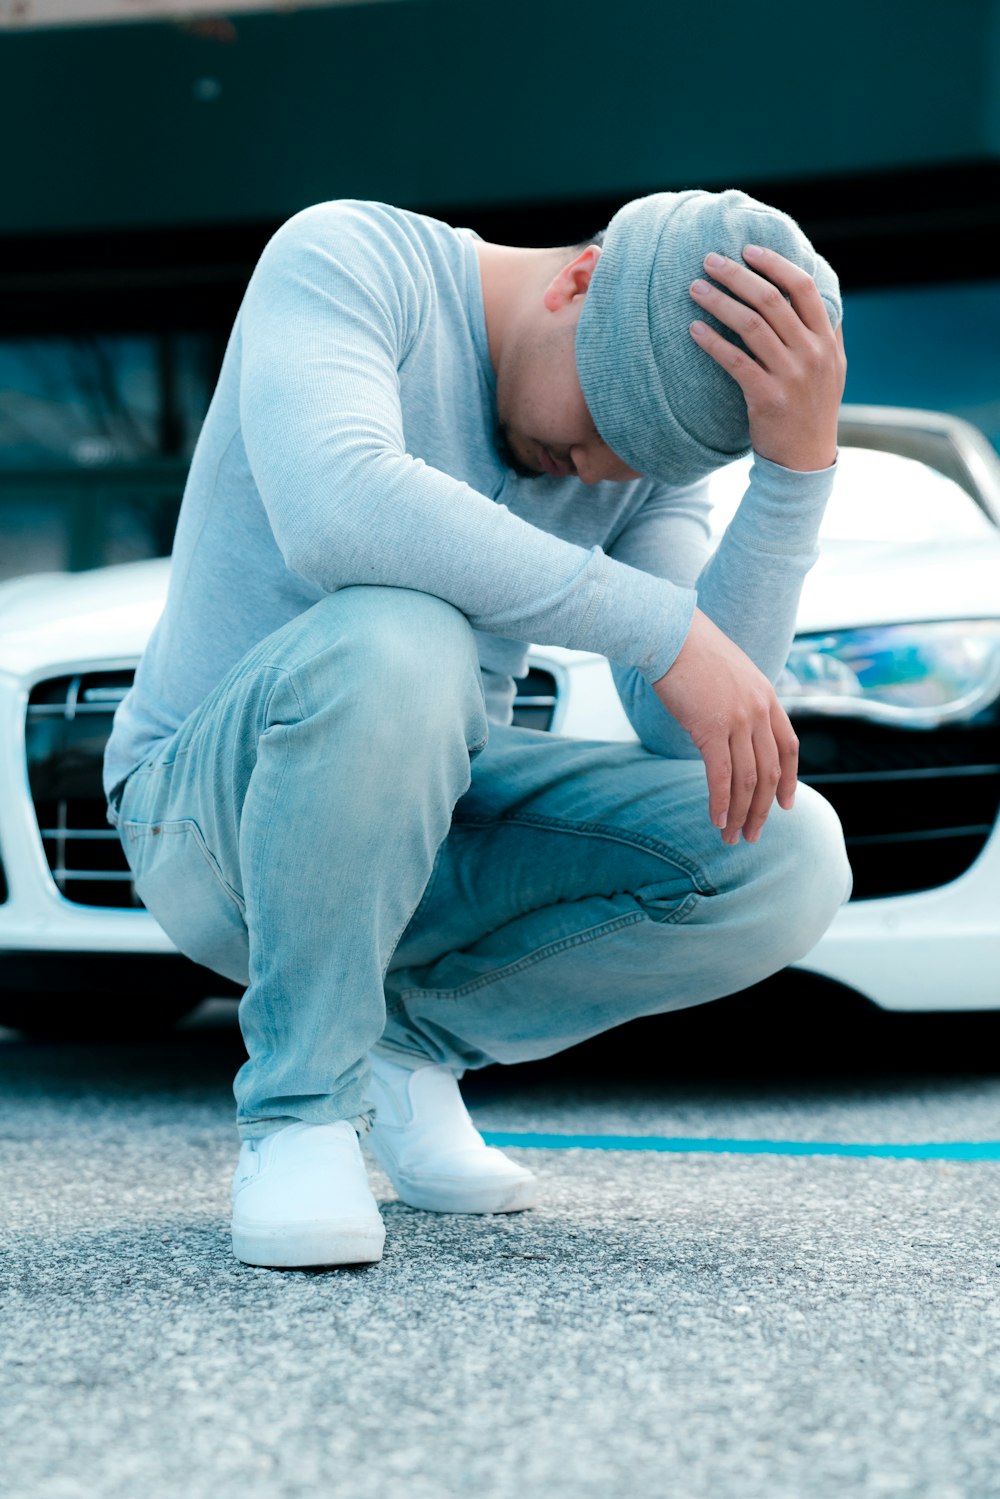 man wearing grey long-sleeved shirt sitting on ground while holding his knit cap